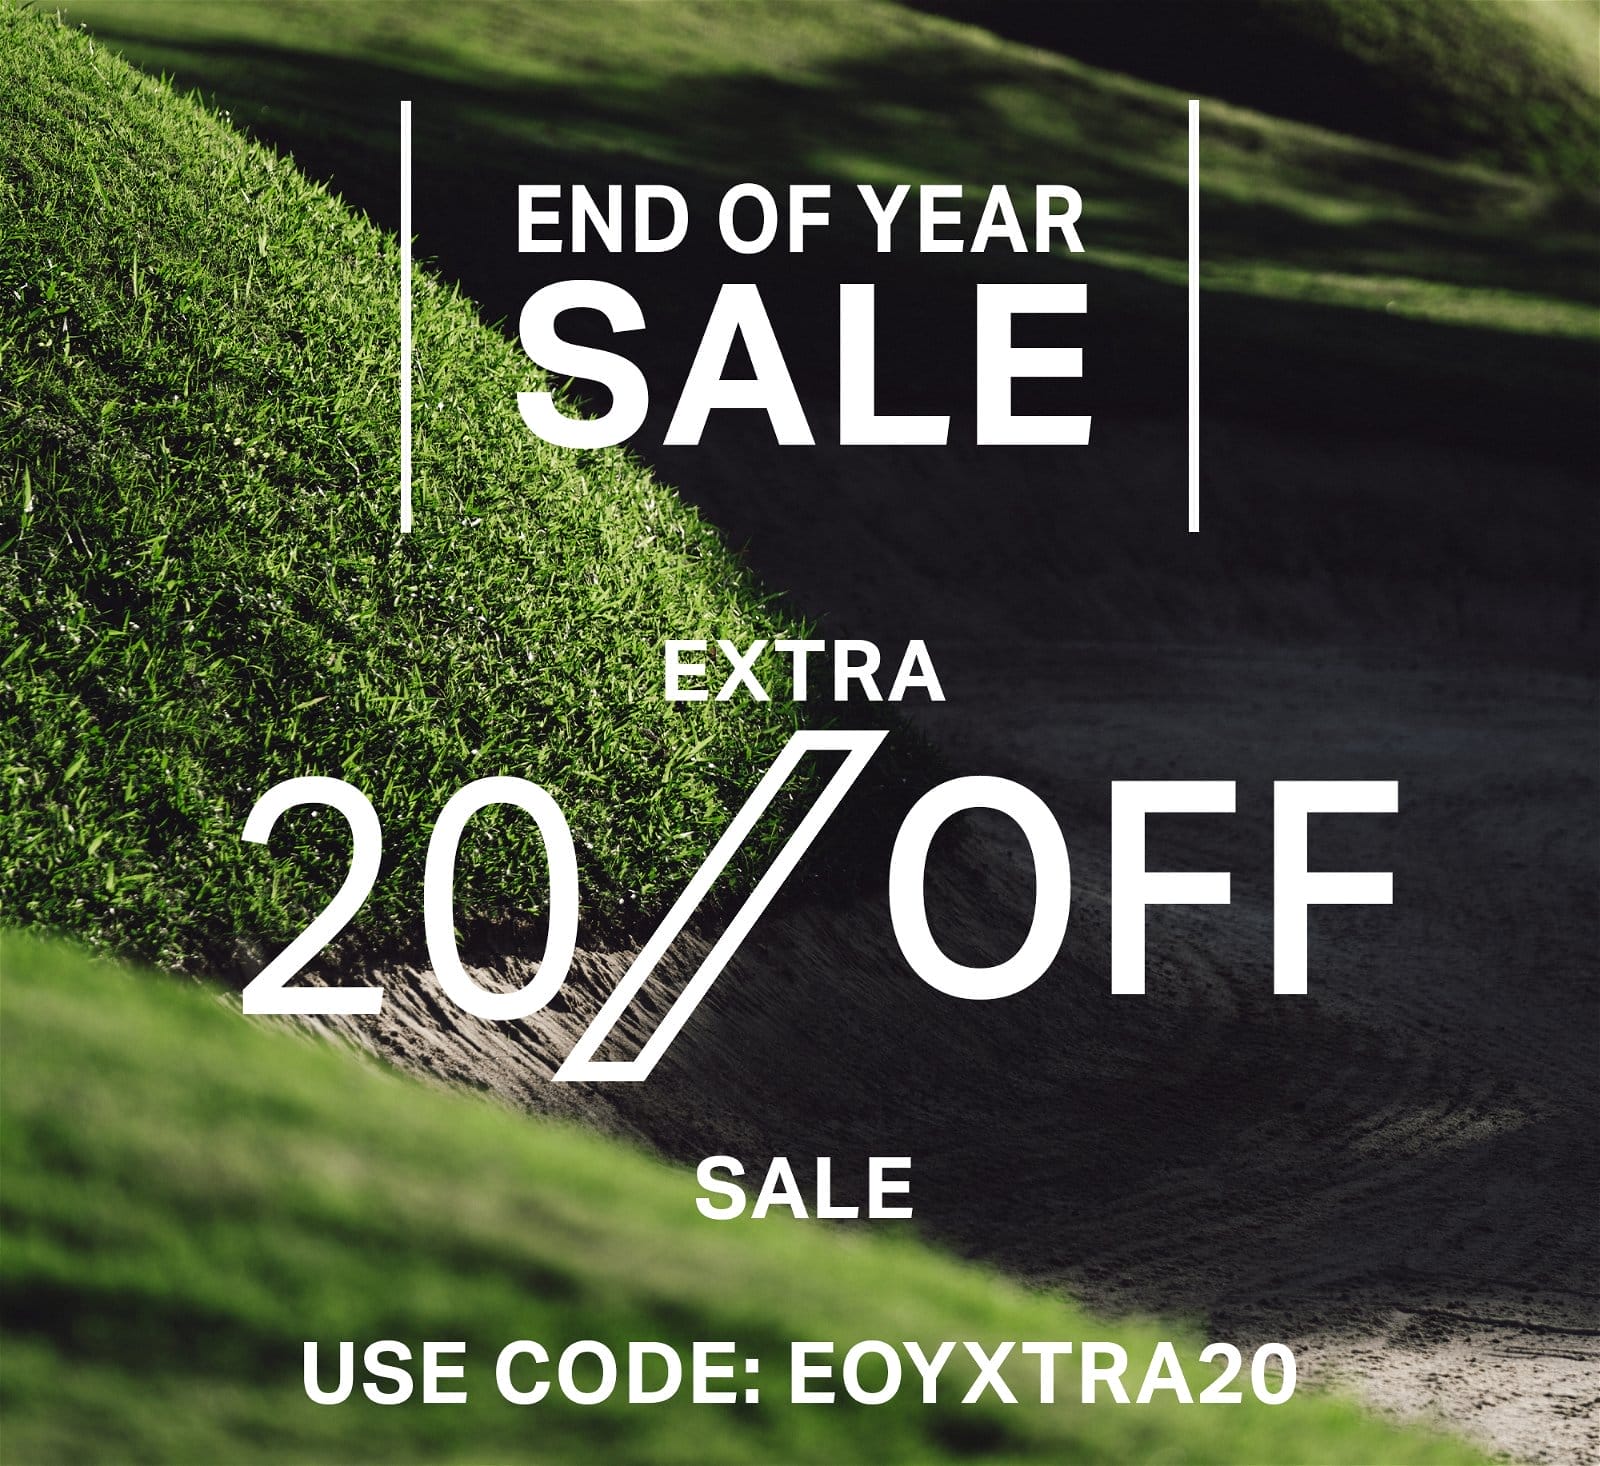 END OF YEAR SALE MENS